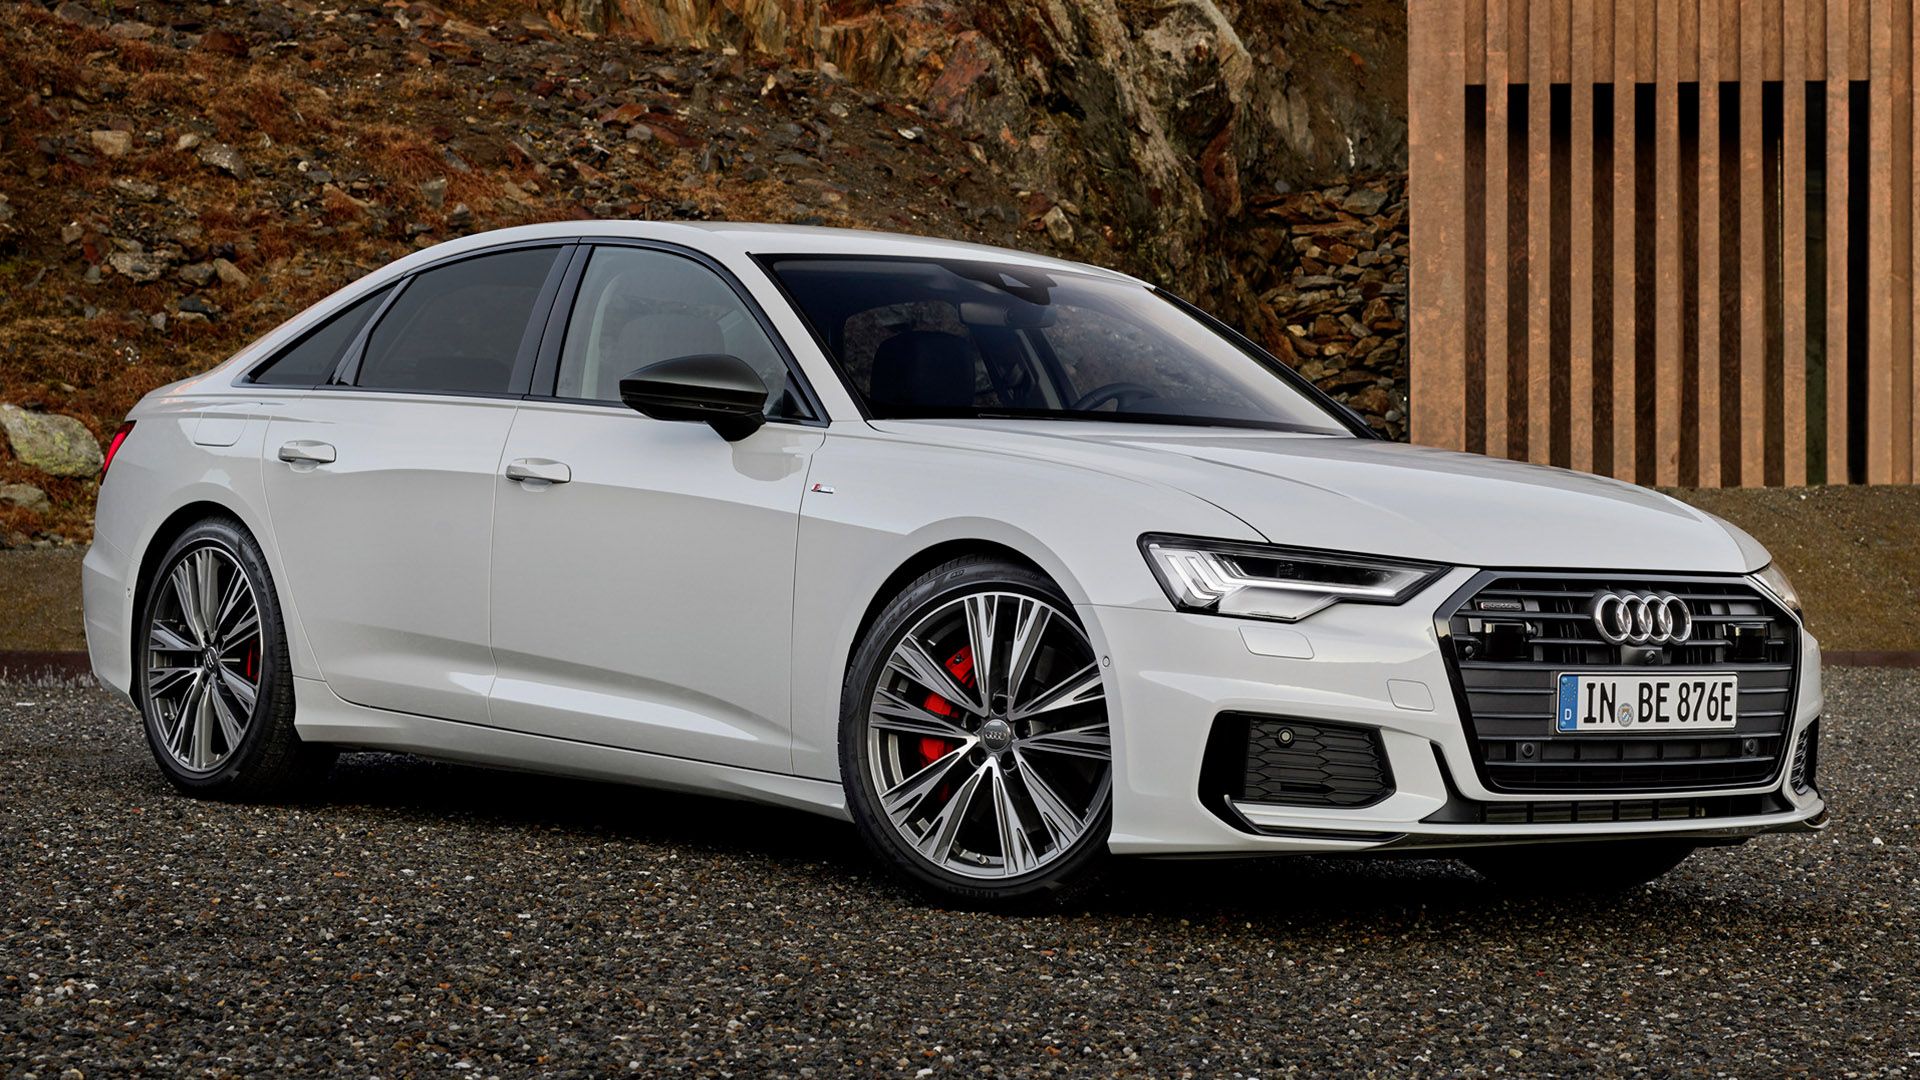 White Audi TFSIe with red brake discs standing in a courtyard, a mountain with leaves in the background